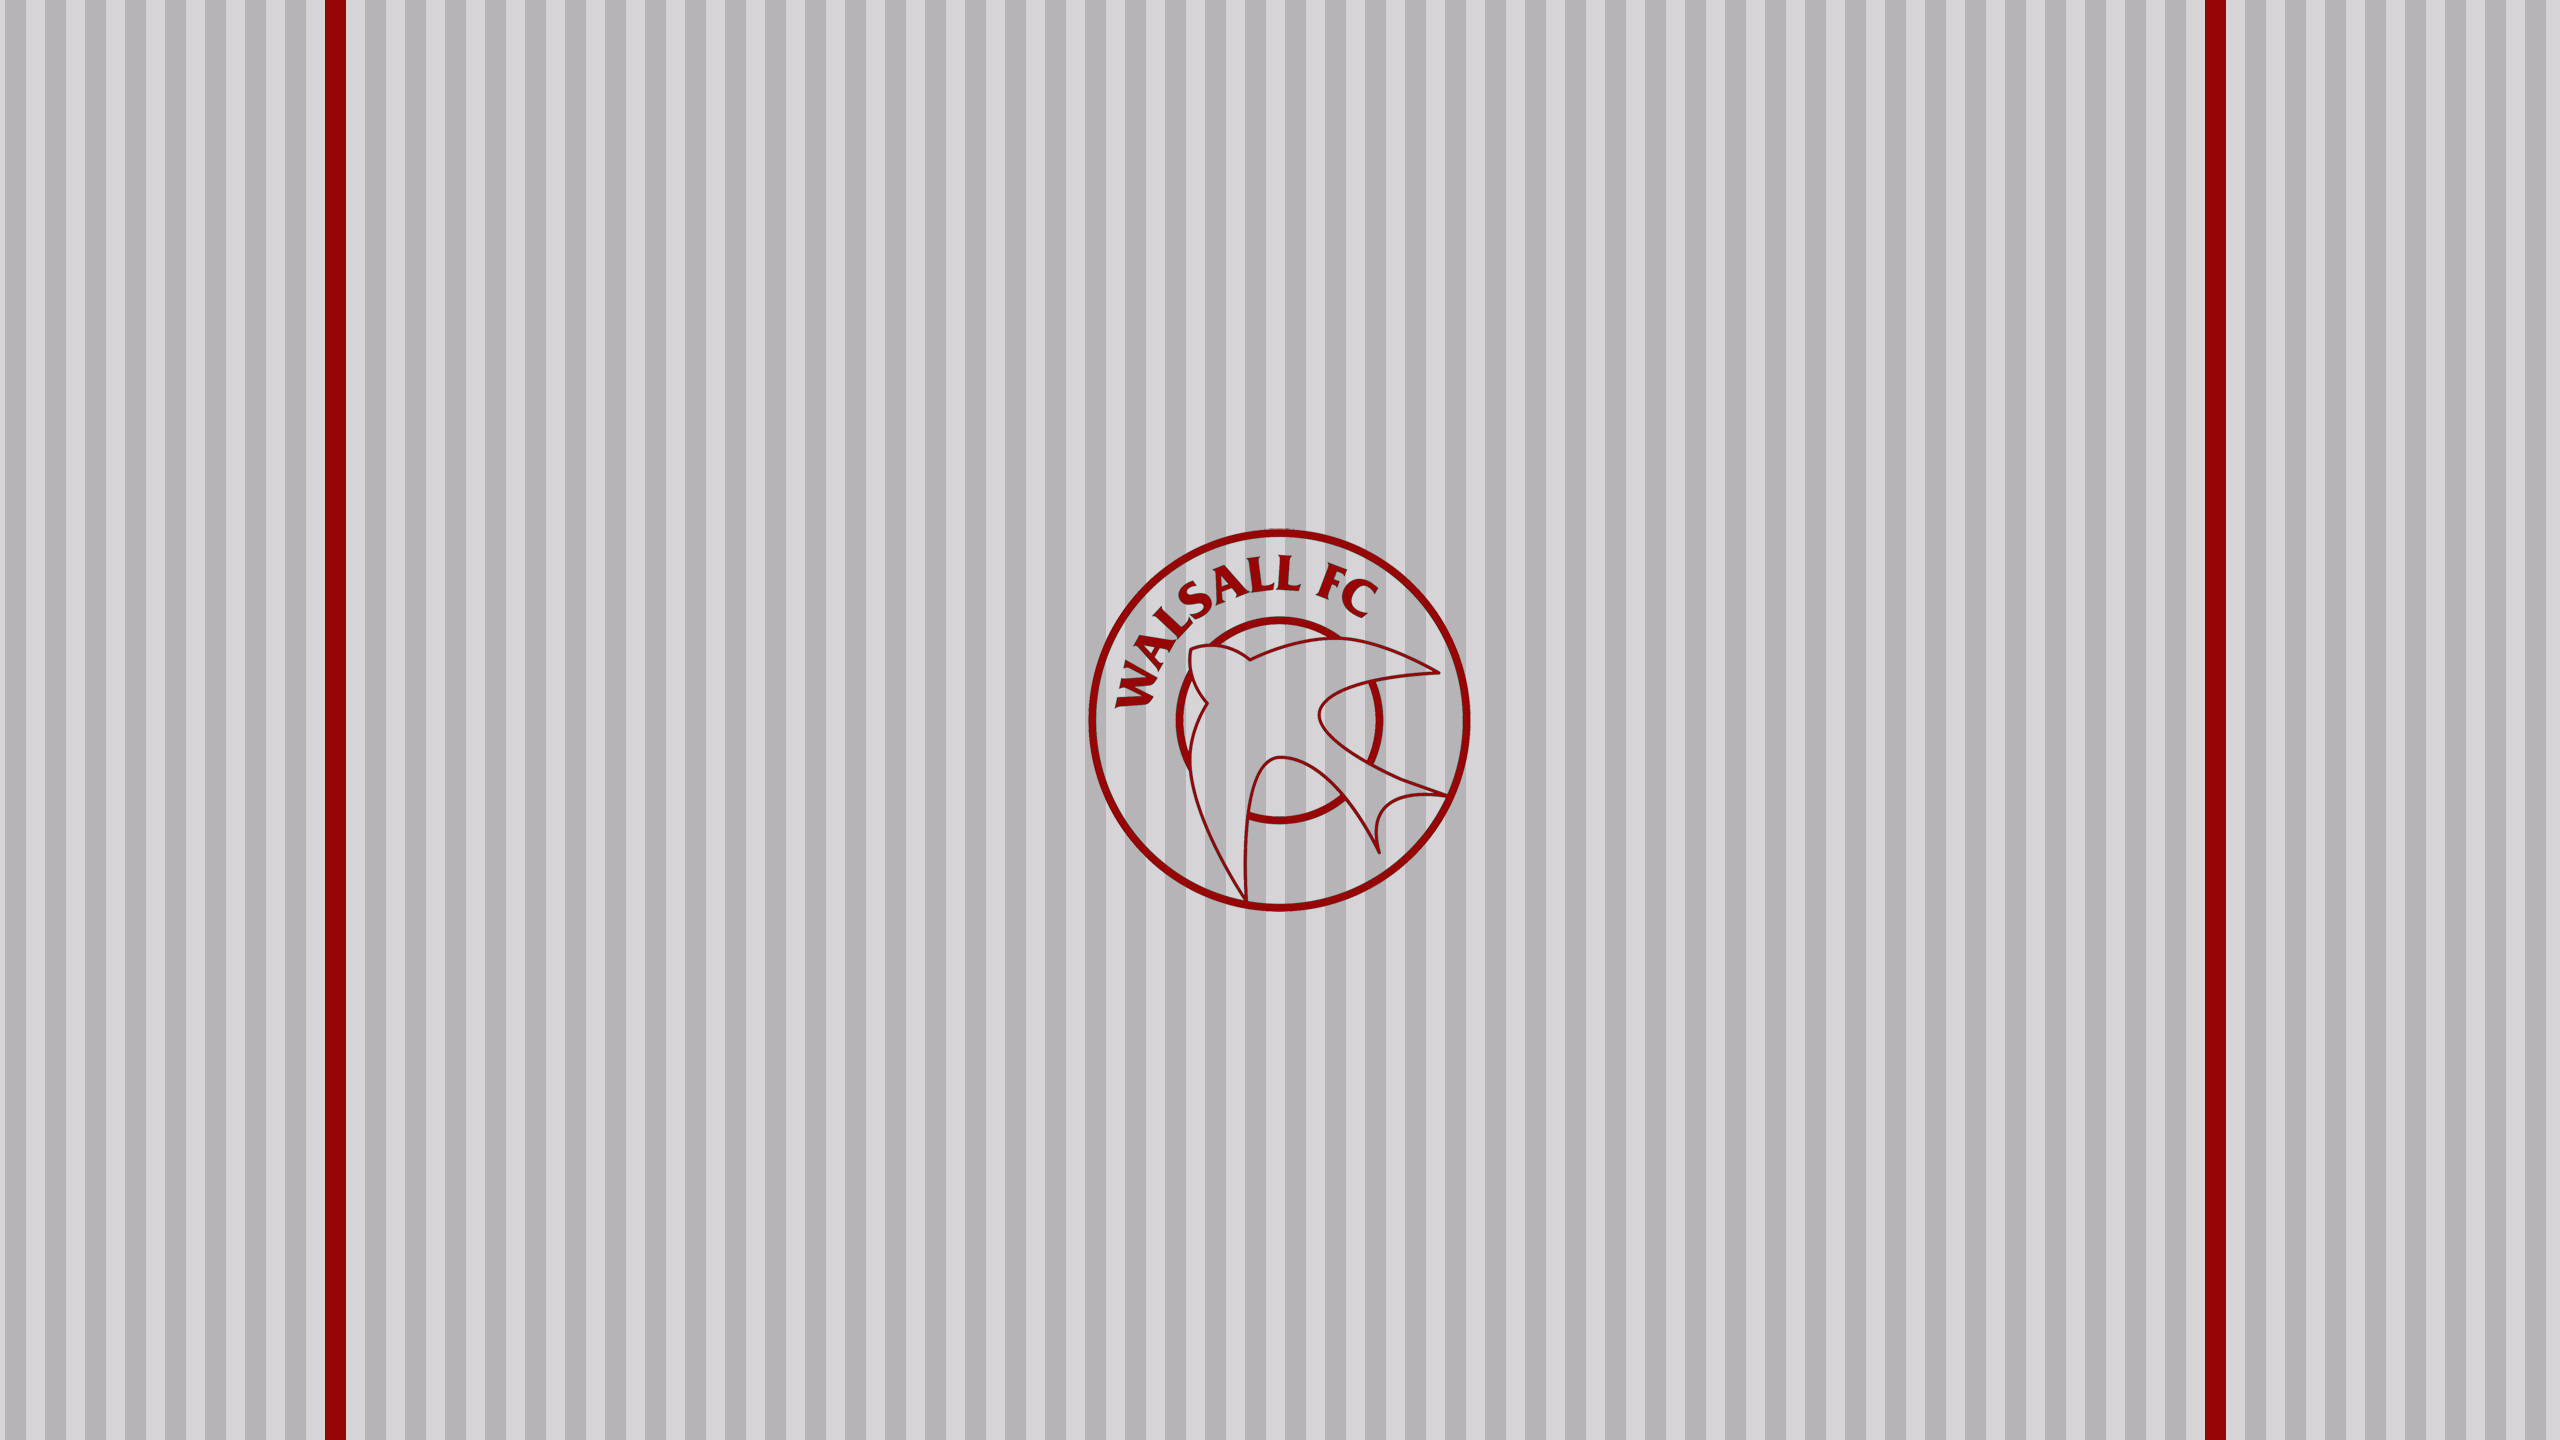 Walsall F.C. Wallpapers